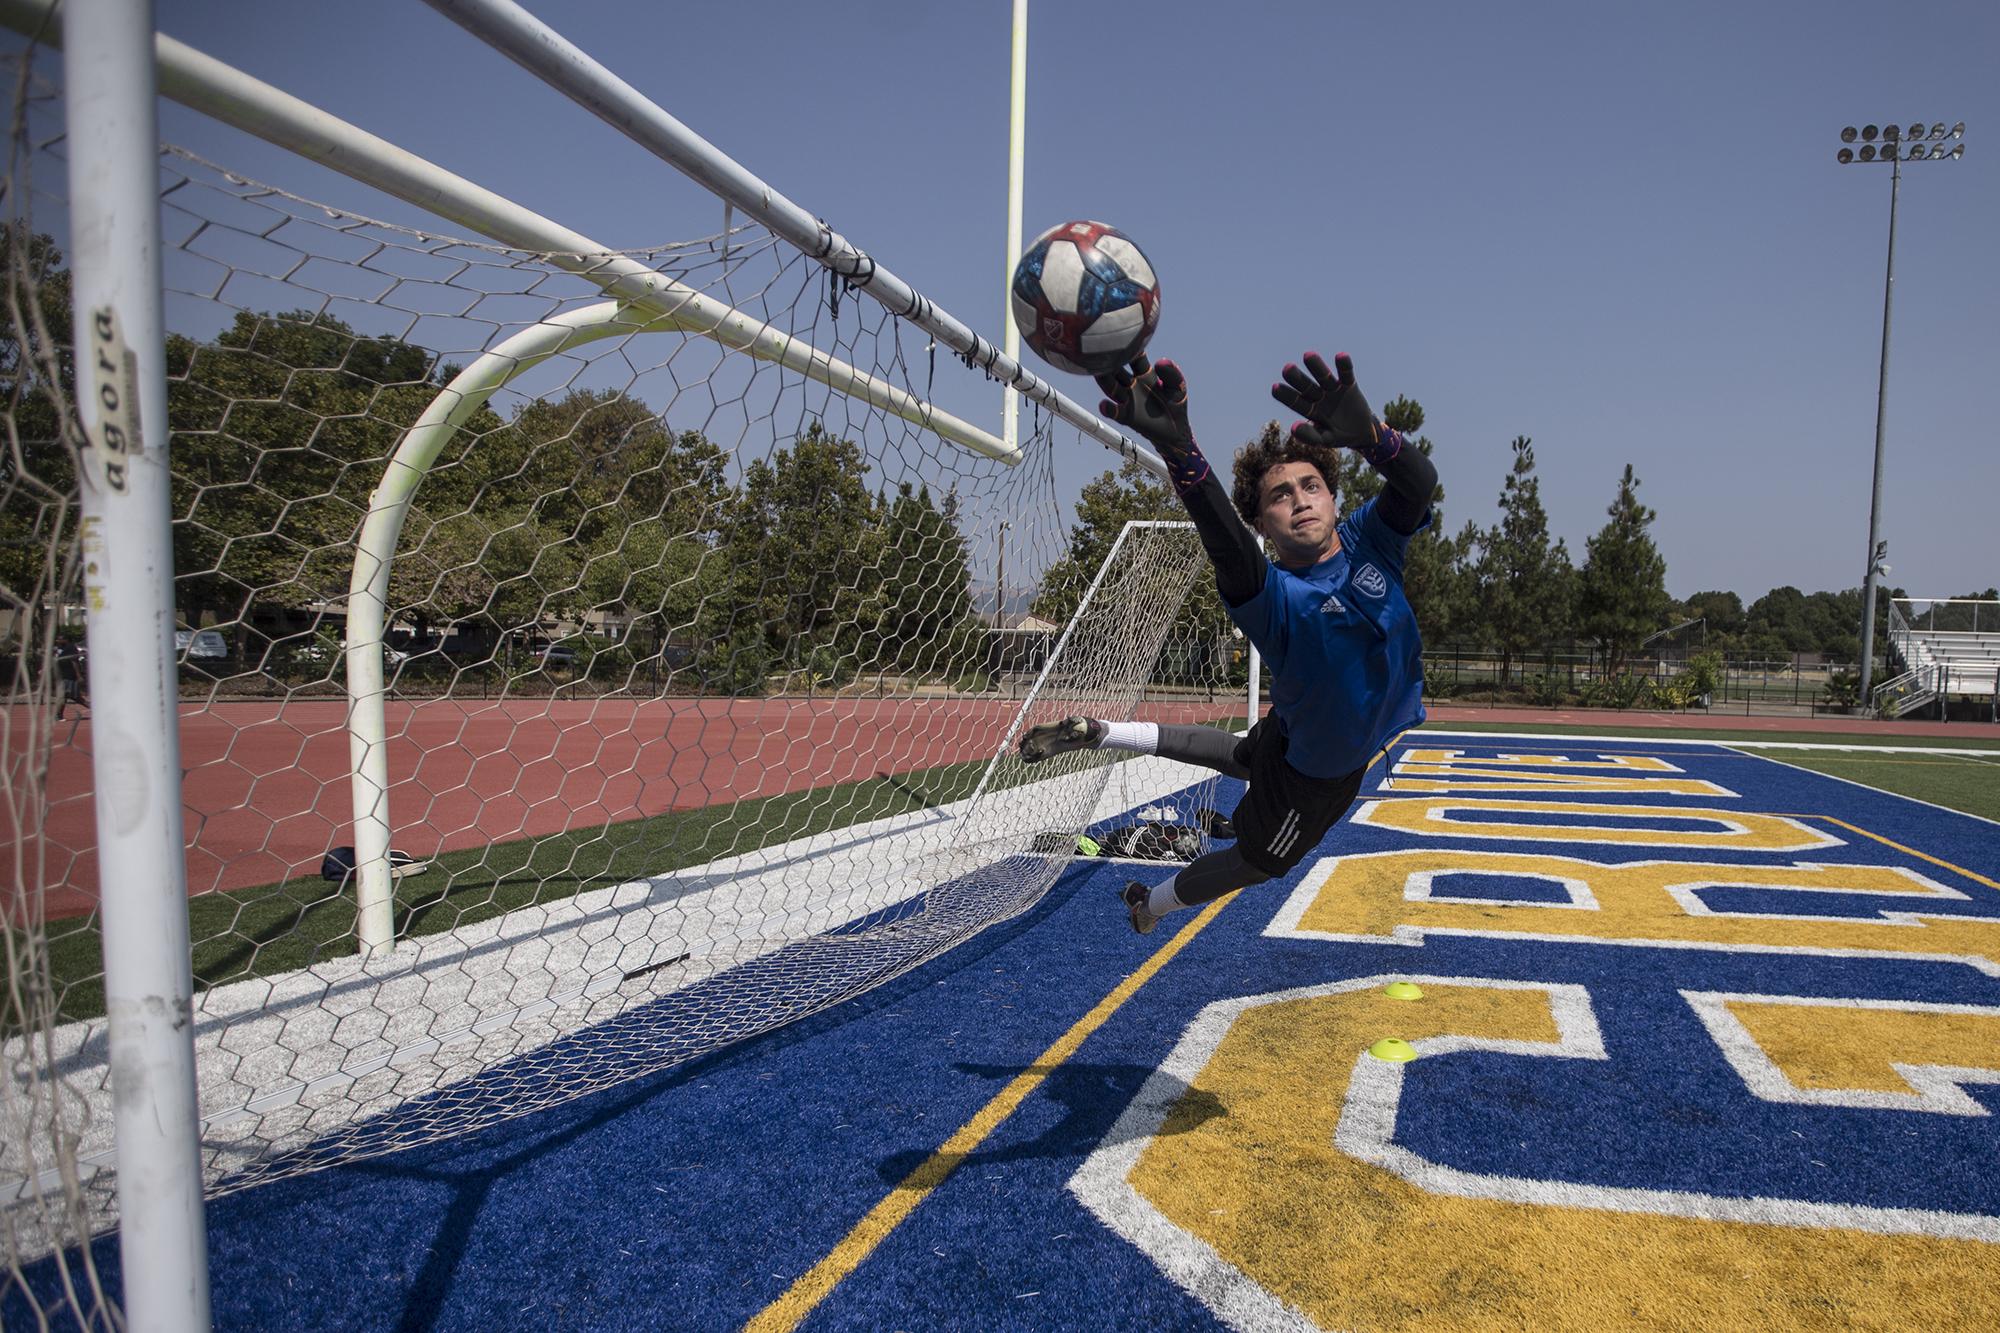 Damián Alguera practices at Oak Grove High School in San José, California on August 24, 2021. His father, Edgar Alguera, played keeper in El Salvador's top league in the 80s. Damián debuted with the country's top squad on September 24, 2021 in a friendly against Guatemala.